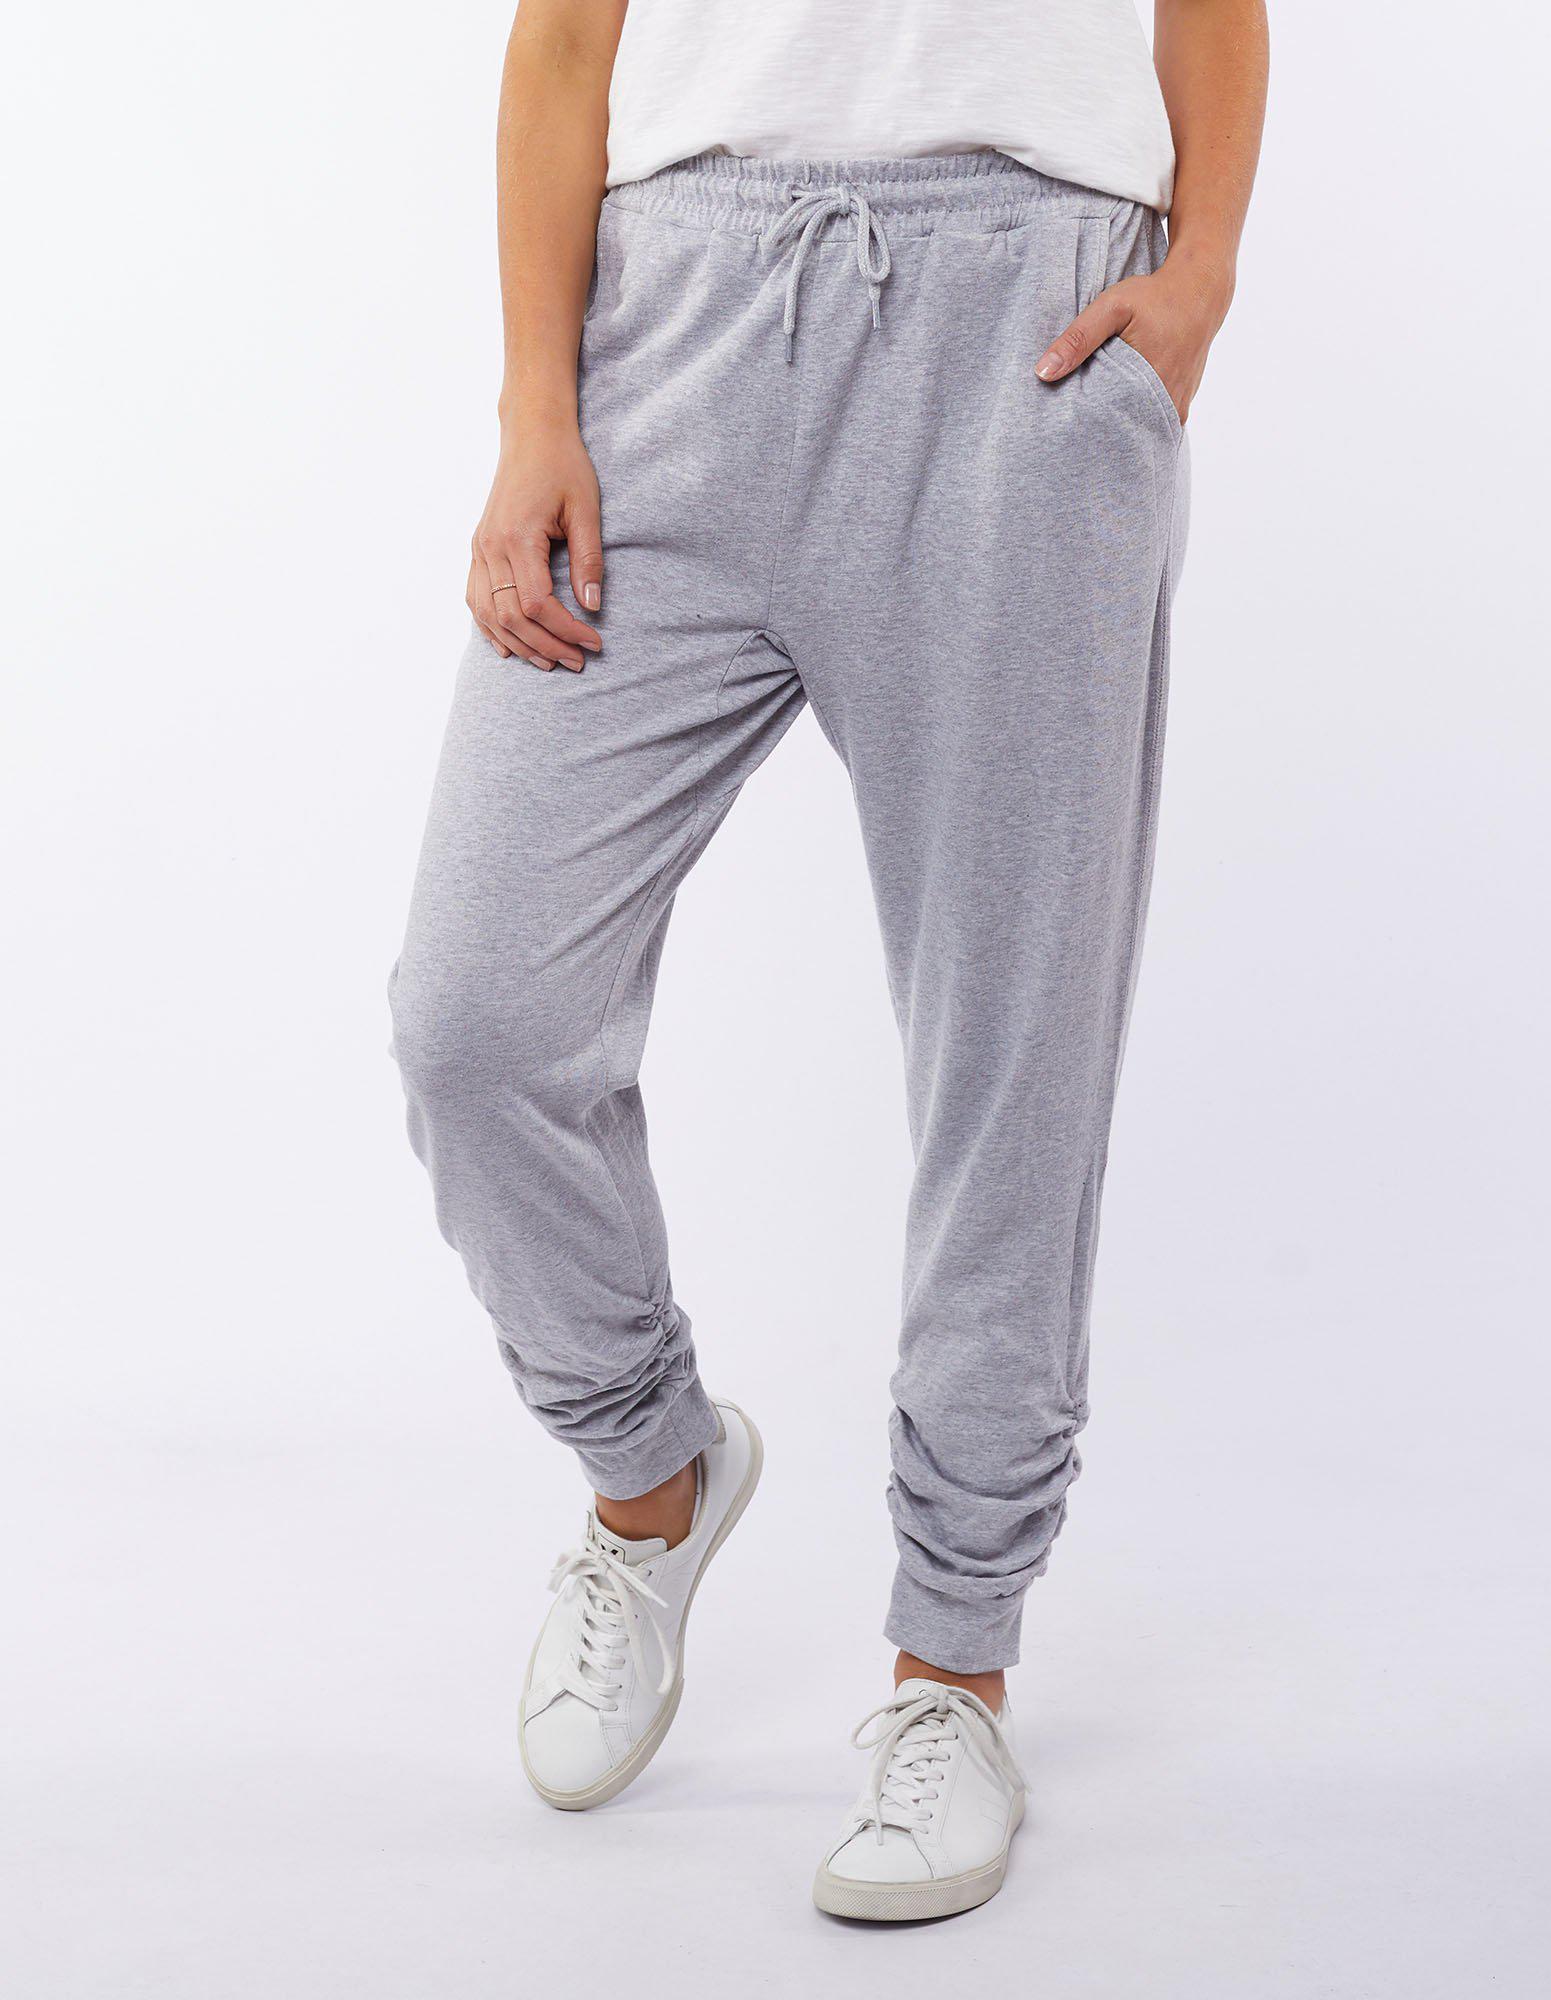 Reece Pant - Grey Marle - Foxwood - FUDGE Gifts Home Lifestyle